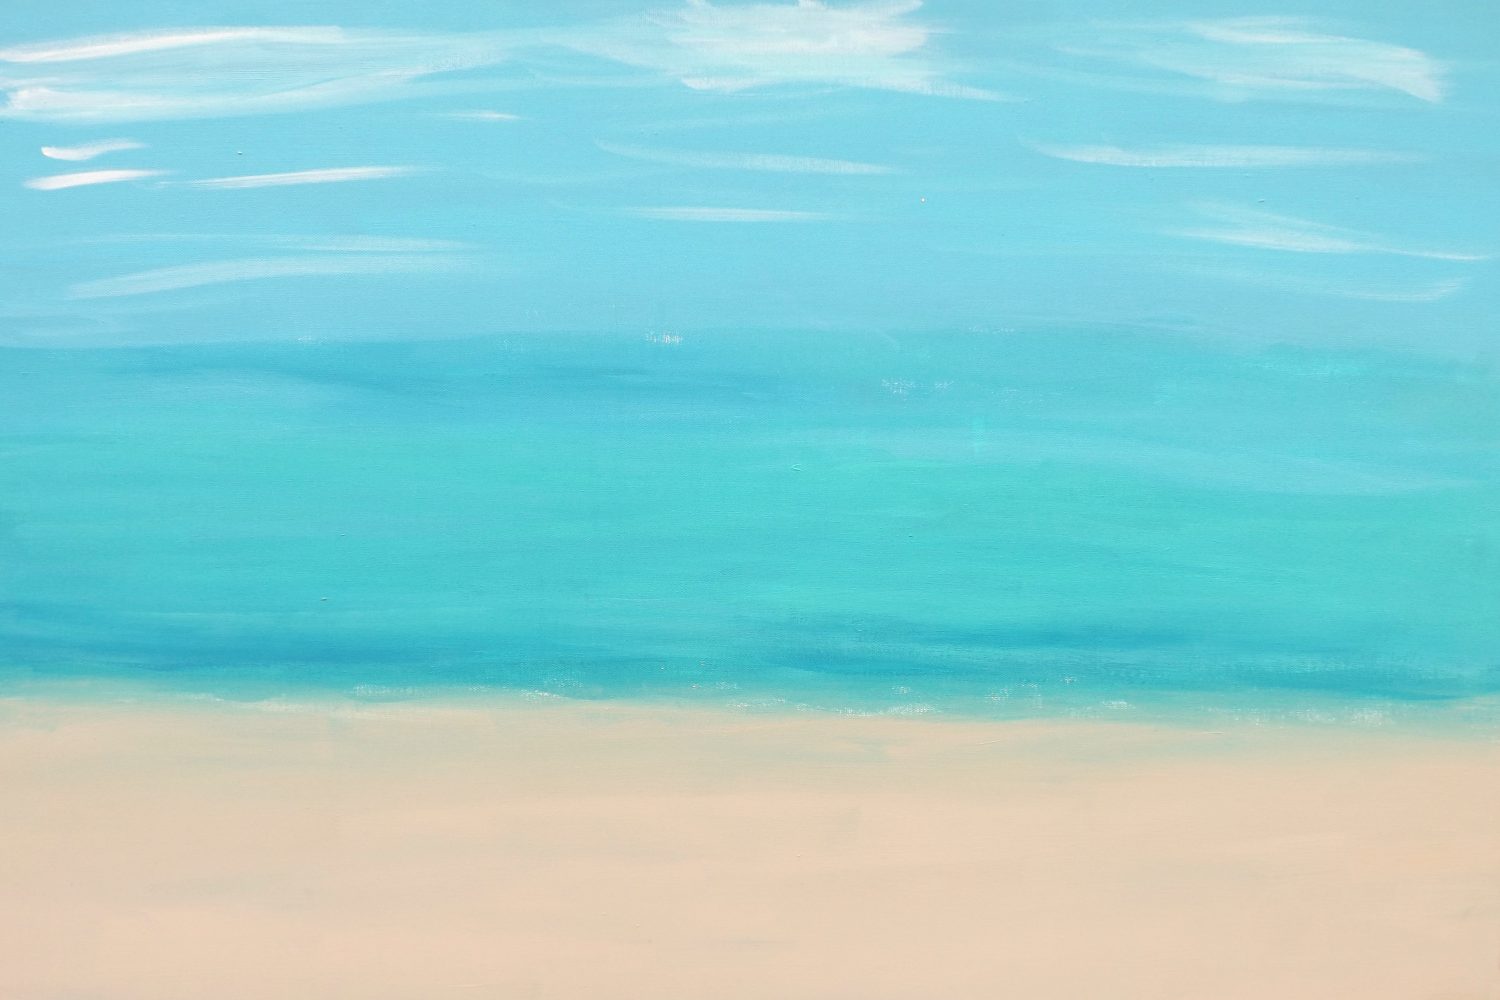 thumbnail of Sand Beach by various artist. Medium: Painted with acrylic on canvas. Date 2013